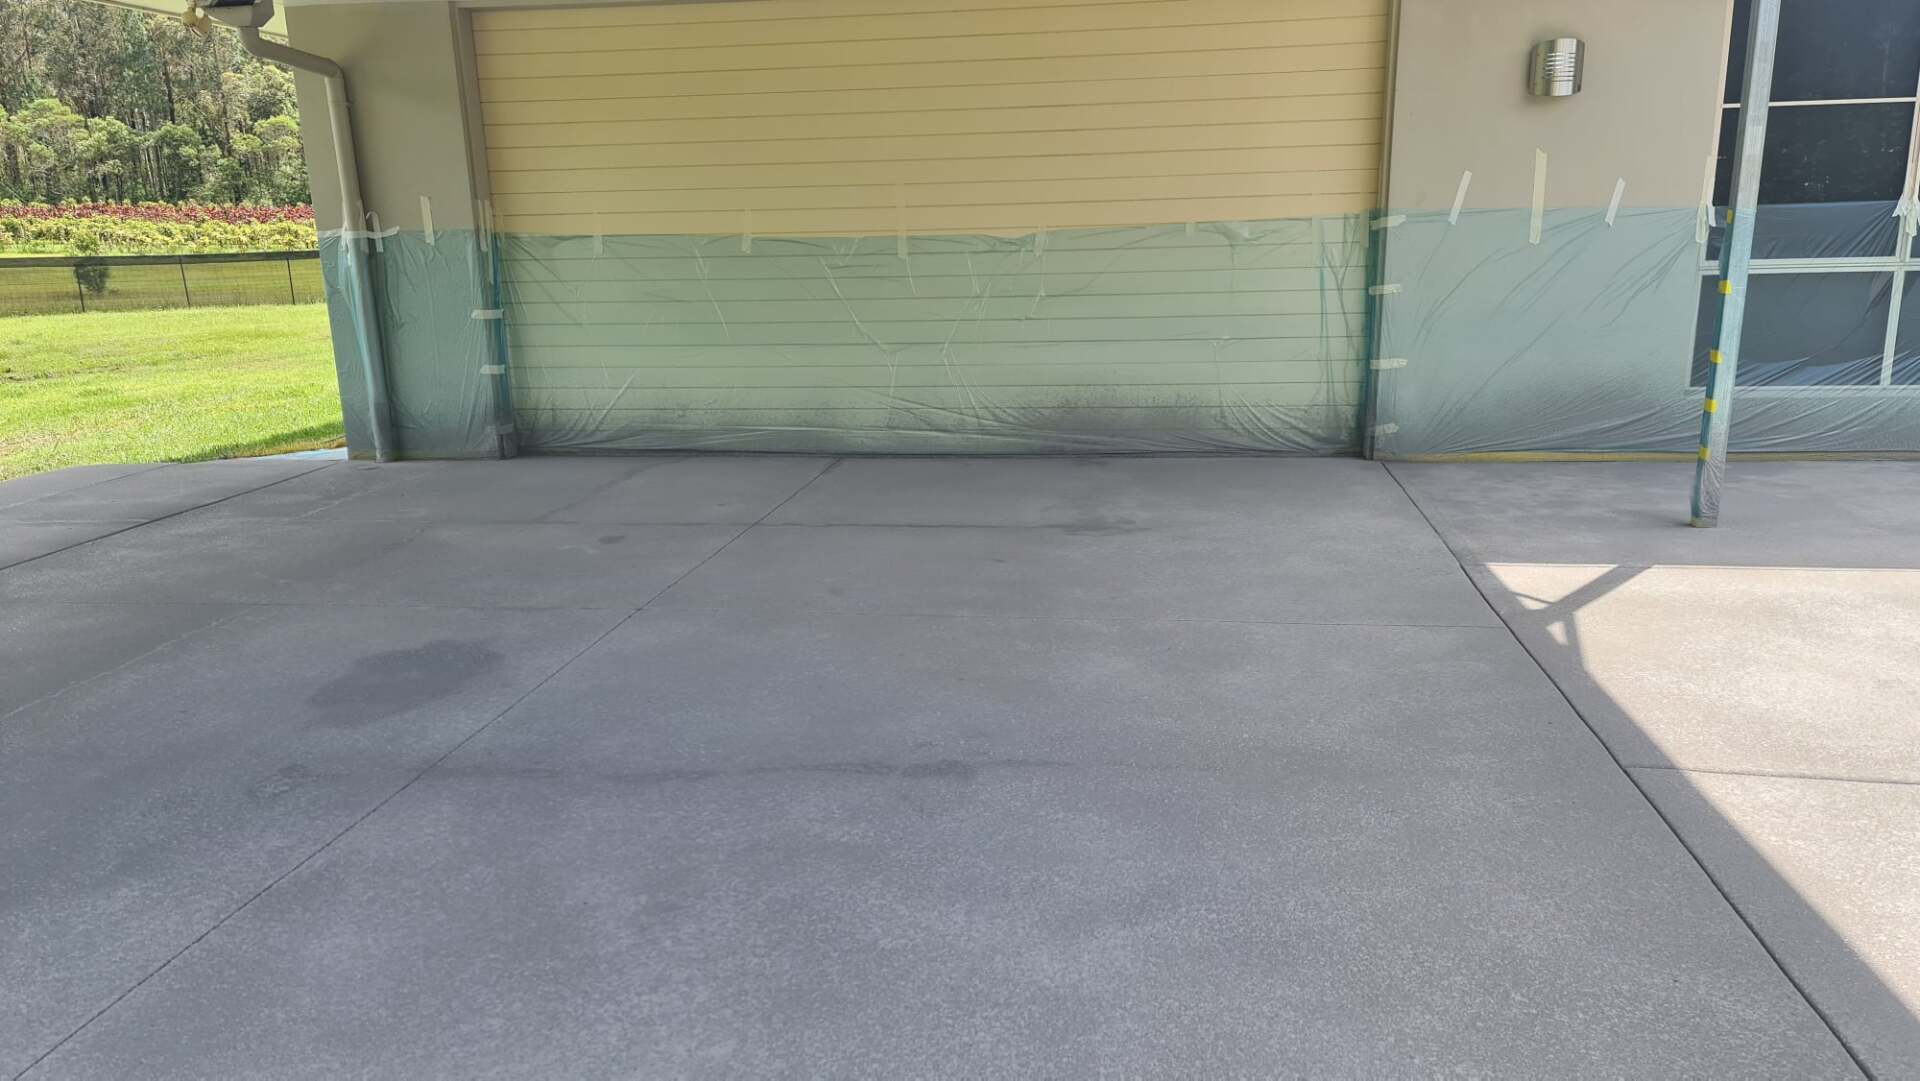  Plastering Cement Concrete on a Sidewalk — Professional Concreting in Sunshine Coast, QLD